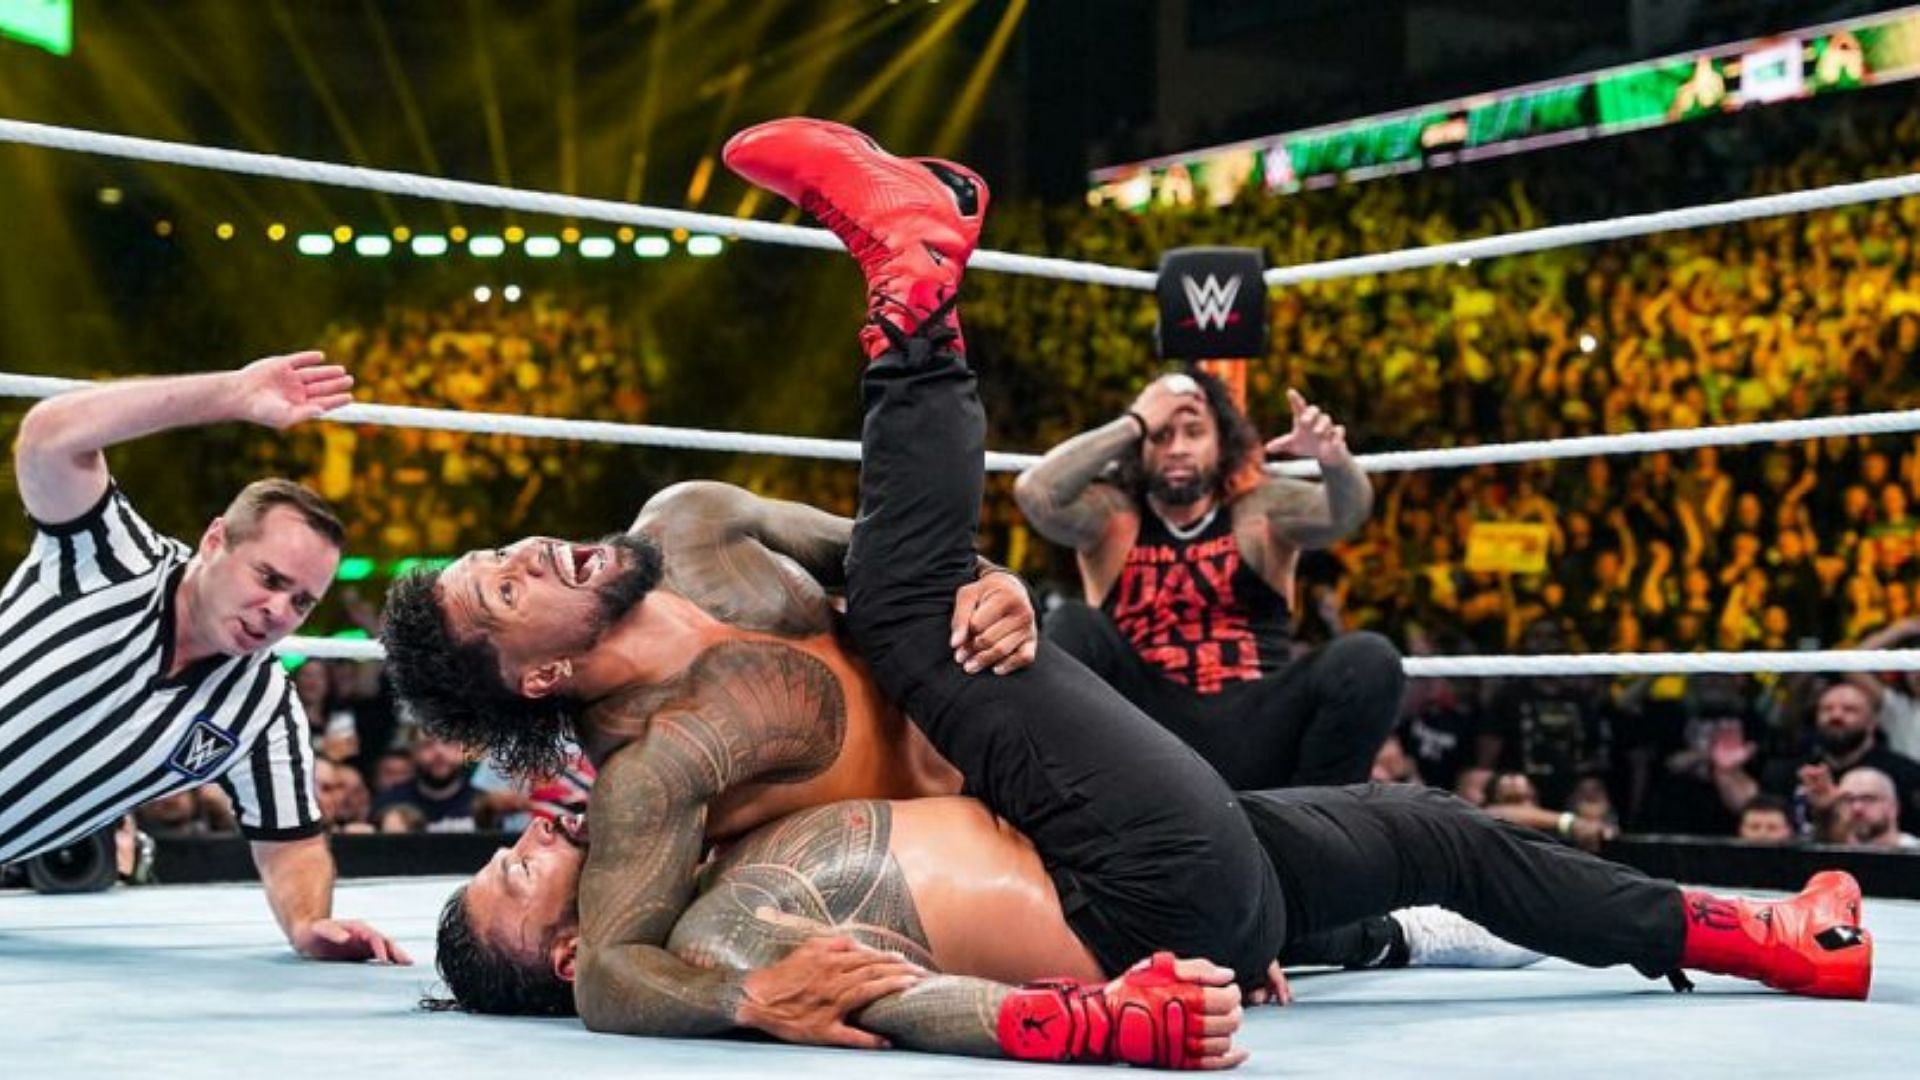 Jey Uso pinned Roman Reigns at Money in the Bank.